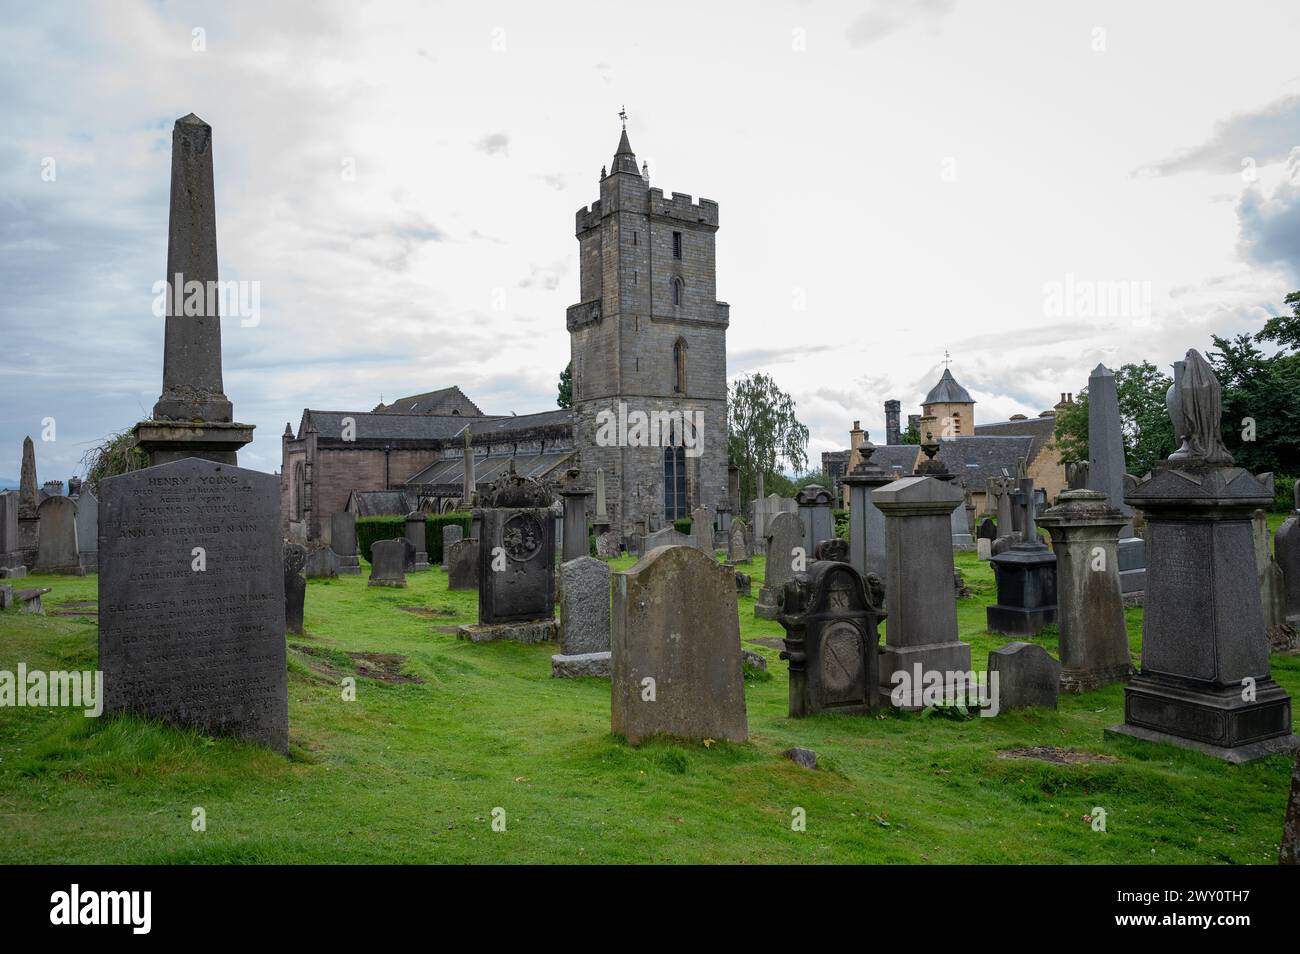 Stirling top of the town, Church Holy Rude, Cemetery with historic gravestones crosses, granite memorials on Castle Hill, Stirling, Scotland, UK Stock Photo